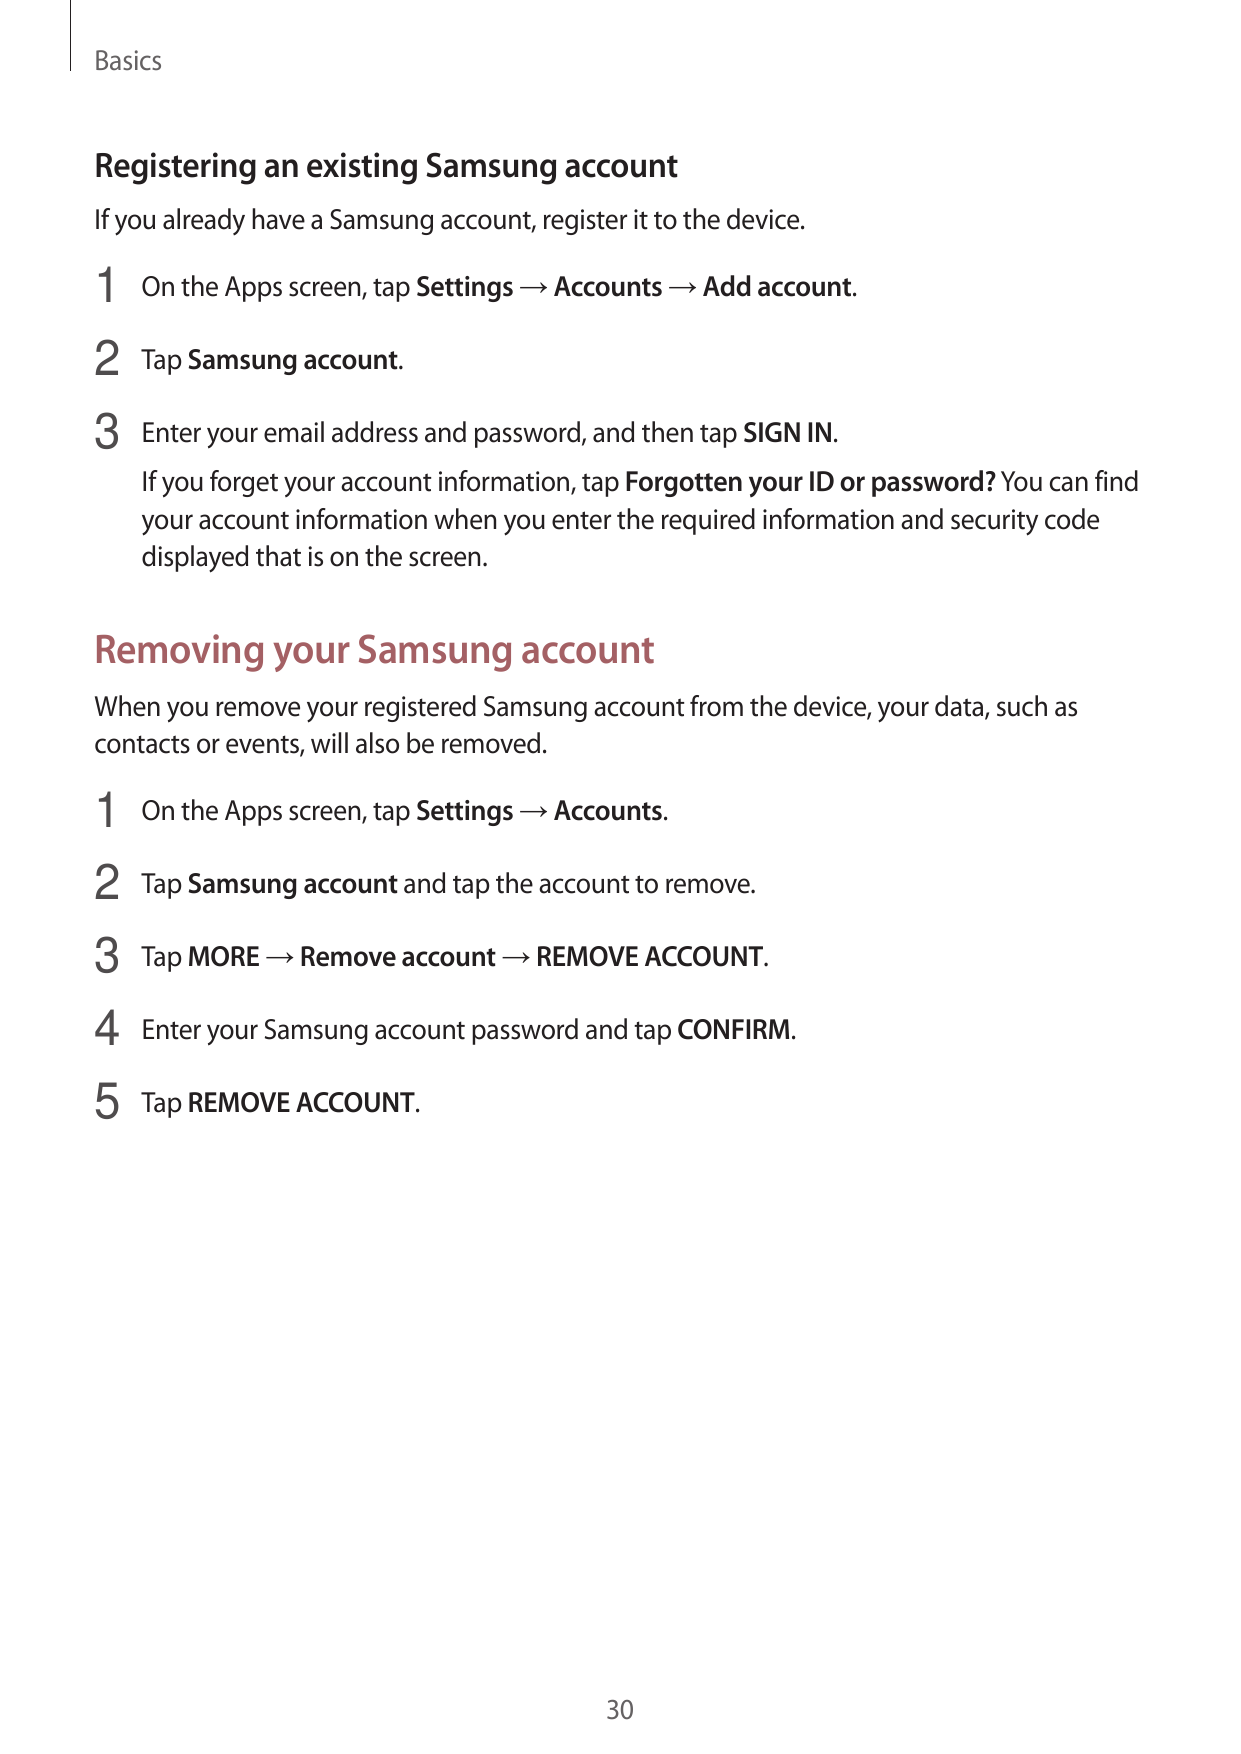 BasicsRegistering an existing Samsung accountIf you already have a Samsung account, register it to the device.1 On the Apps scre